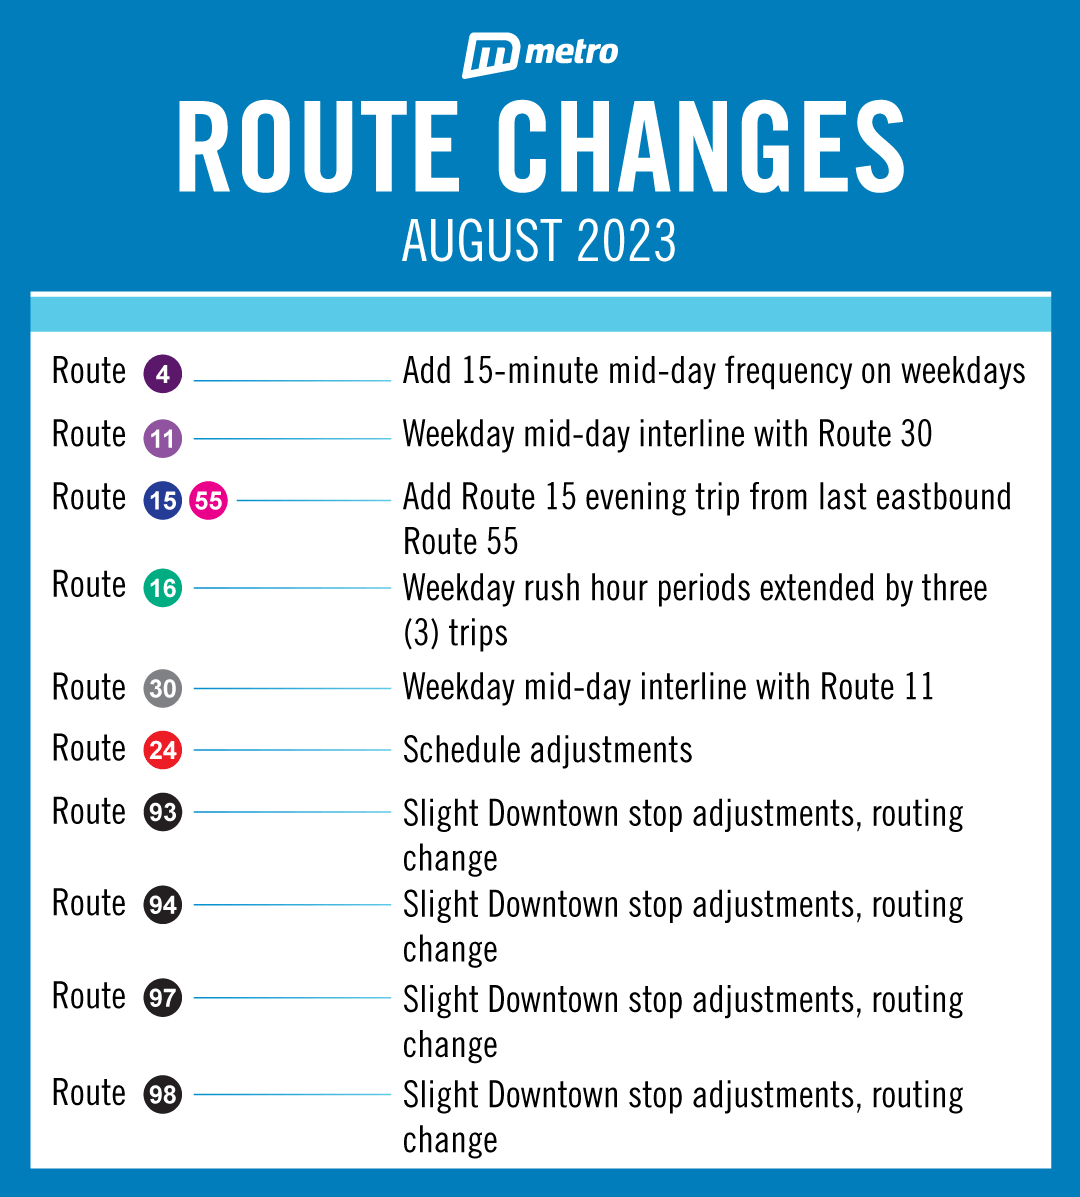 Graphic with the title "Route Changes, August 2023". The route changes listed are: Route 4 - Add 15-minute mid-day frequency on weekdays Route 11 - Weekday mid-day interline with Route 30 Routes 15, 55 - Add Route 15 evening trip from last eastbound Route 55 Route 16 - Weekday rush hour periods extended by three (3) trips Route 30 - Weekday mid-day interline with Route 11 Route 24 - Schedule adjustments Routes 93, 94, 97, & 98 - slight downtown stop adjustments, routing change